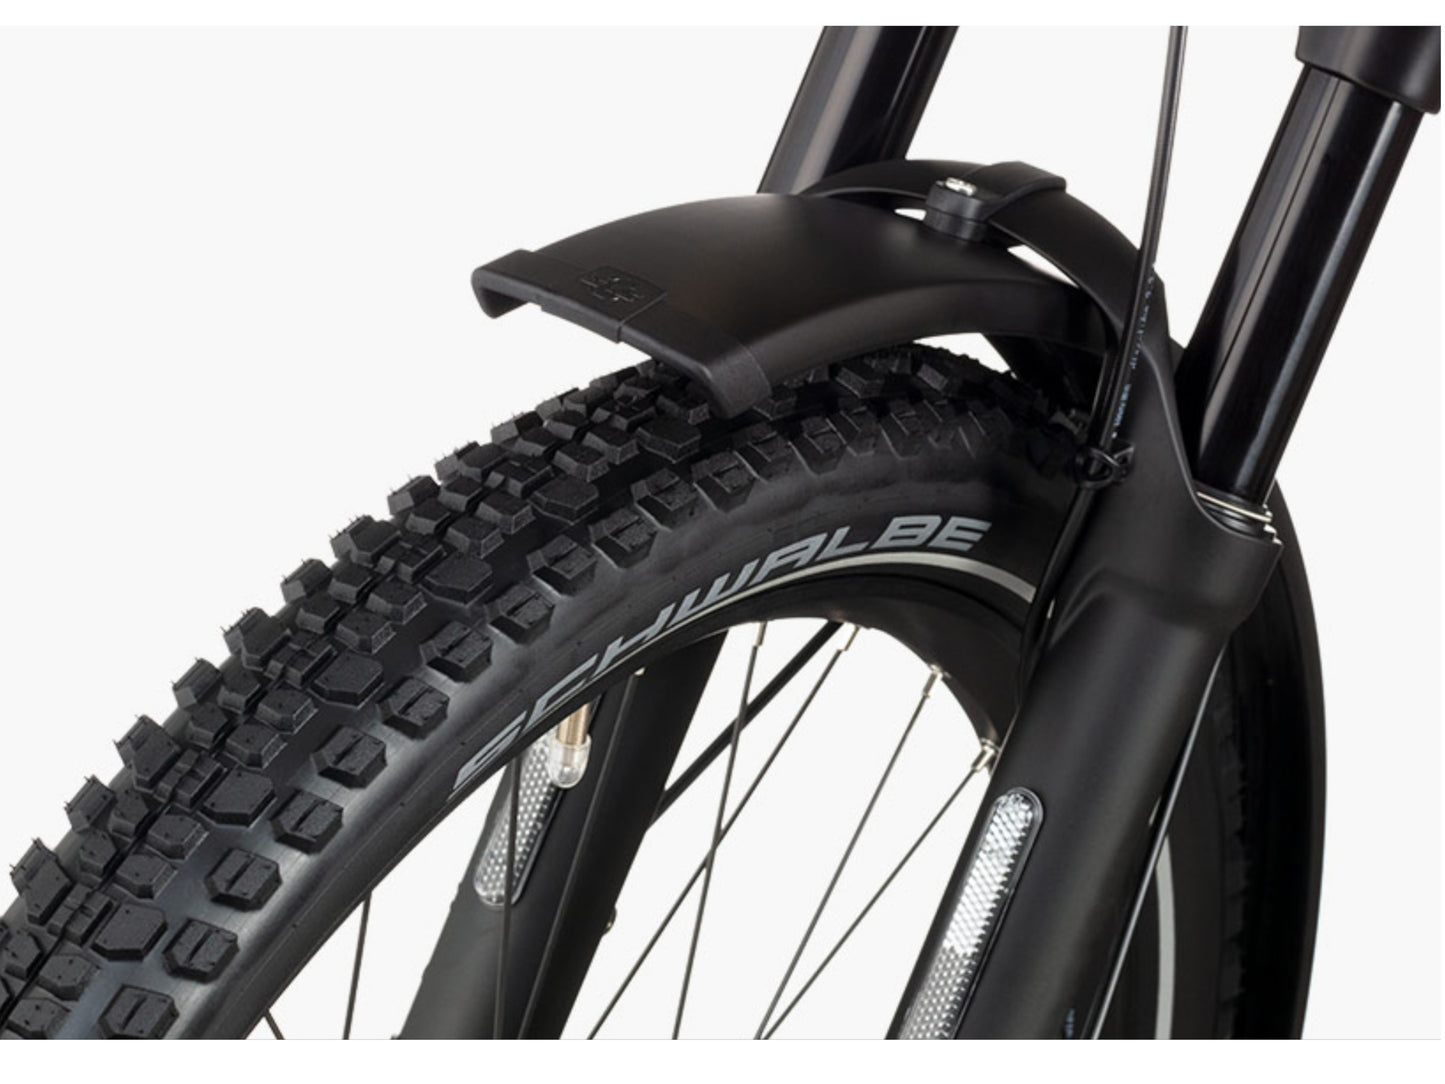 Riese and Muller Supercharger GT Vario emtb hardtail close up gx option